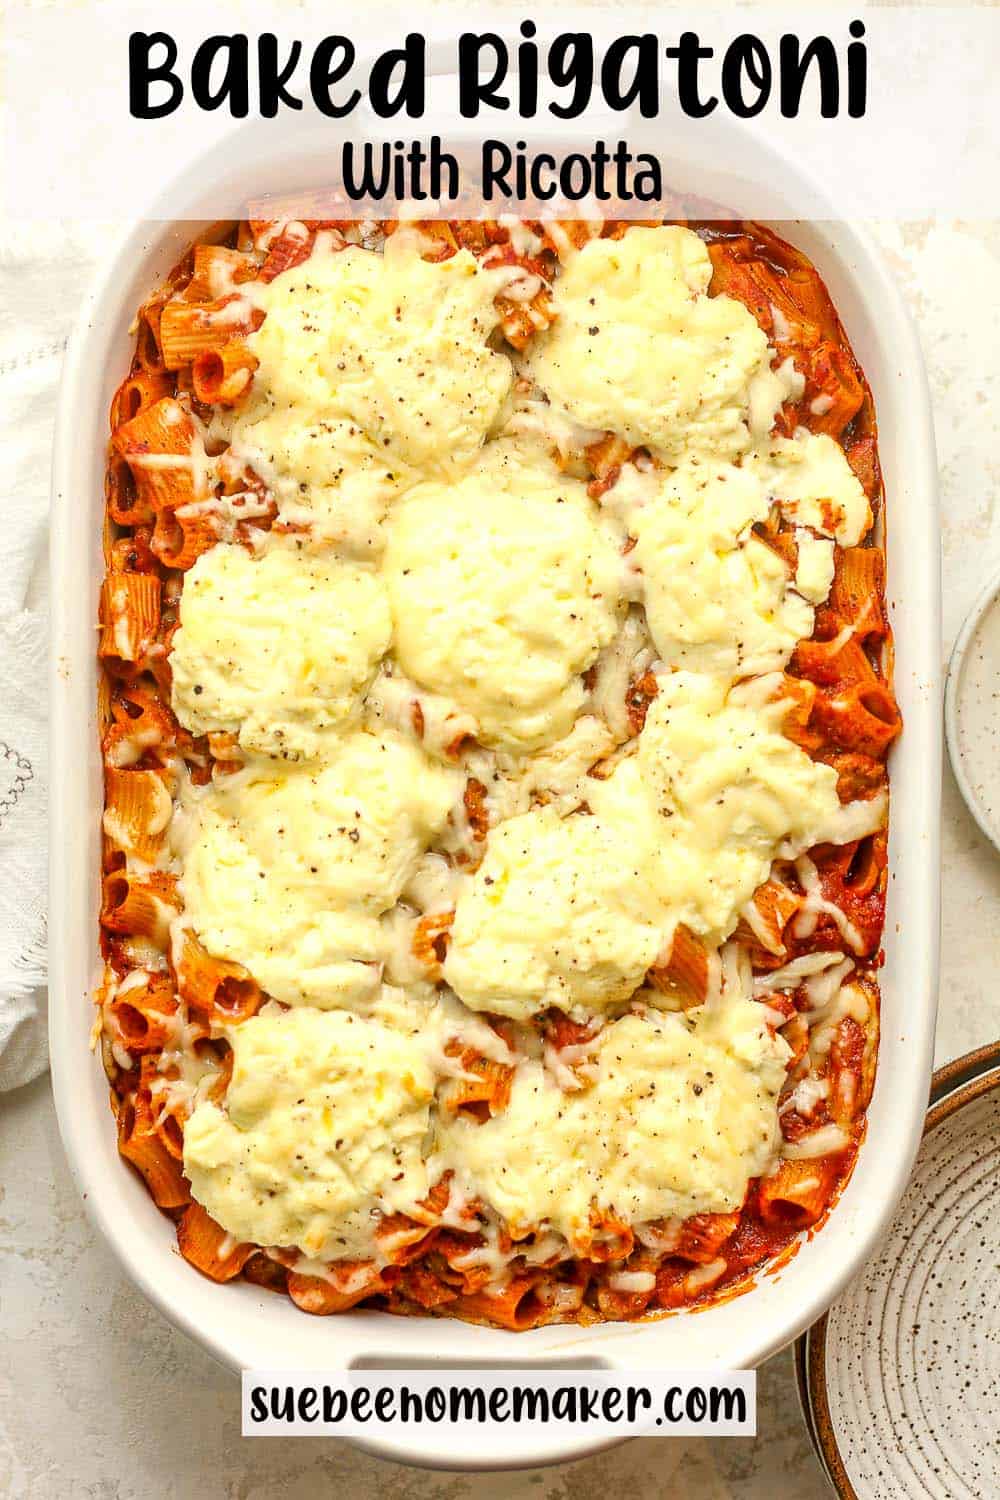 A large casserole pan of baked rigatoni with ricotta cheese.